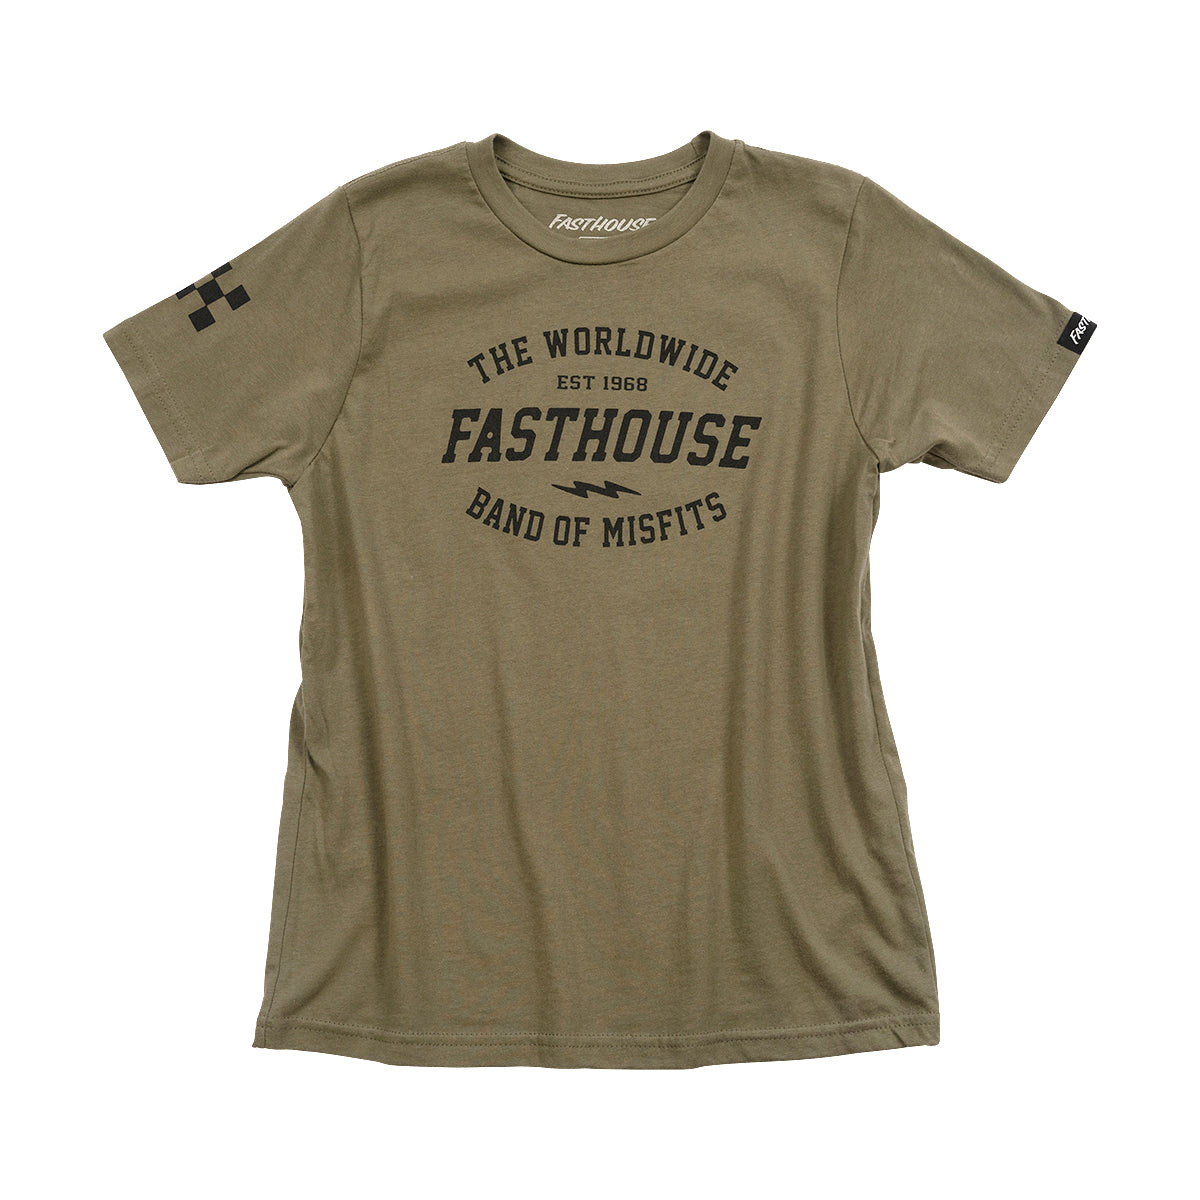 Coalition Youth Tee - Military Green